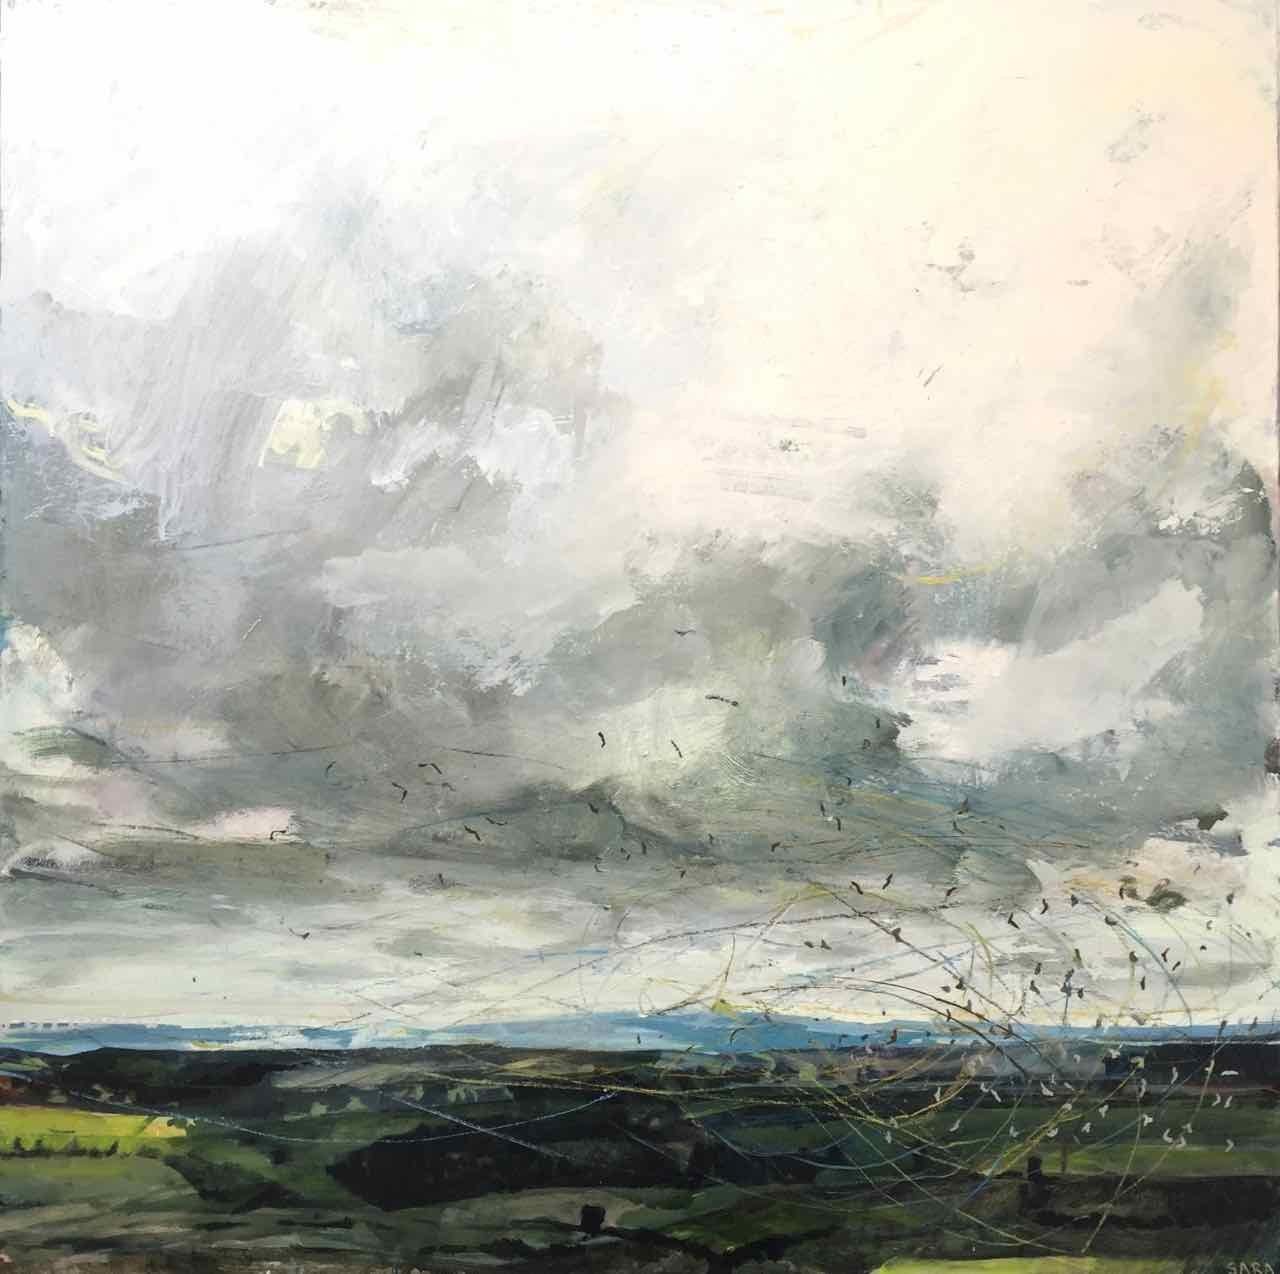 Fieldfares and Redwings (from Castleford Rigg), 2018 by Sara Dudman RWA, Oil on stretched canvas

Sara paints with very gestural mark making, and this painting is part of her body of work which interprets the fascinating interactions and